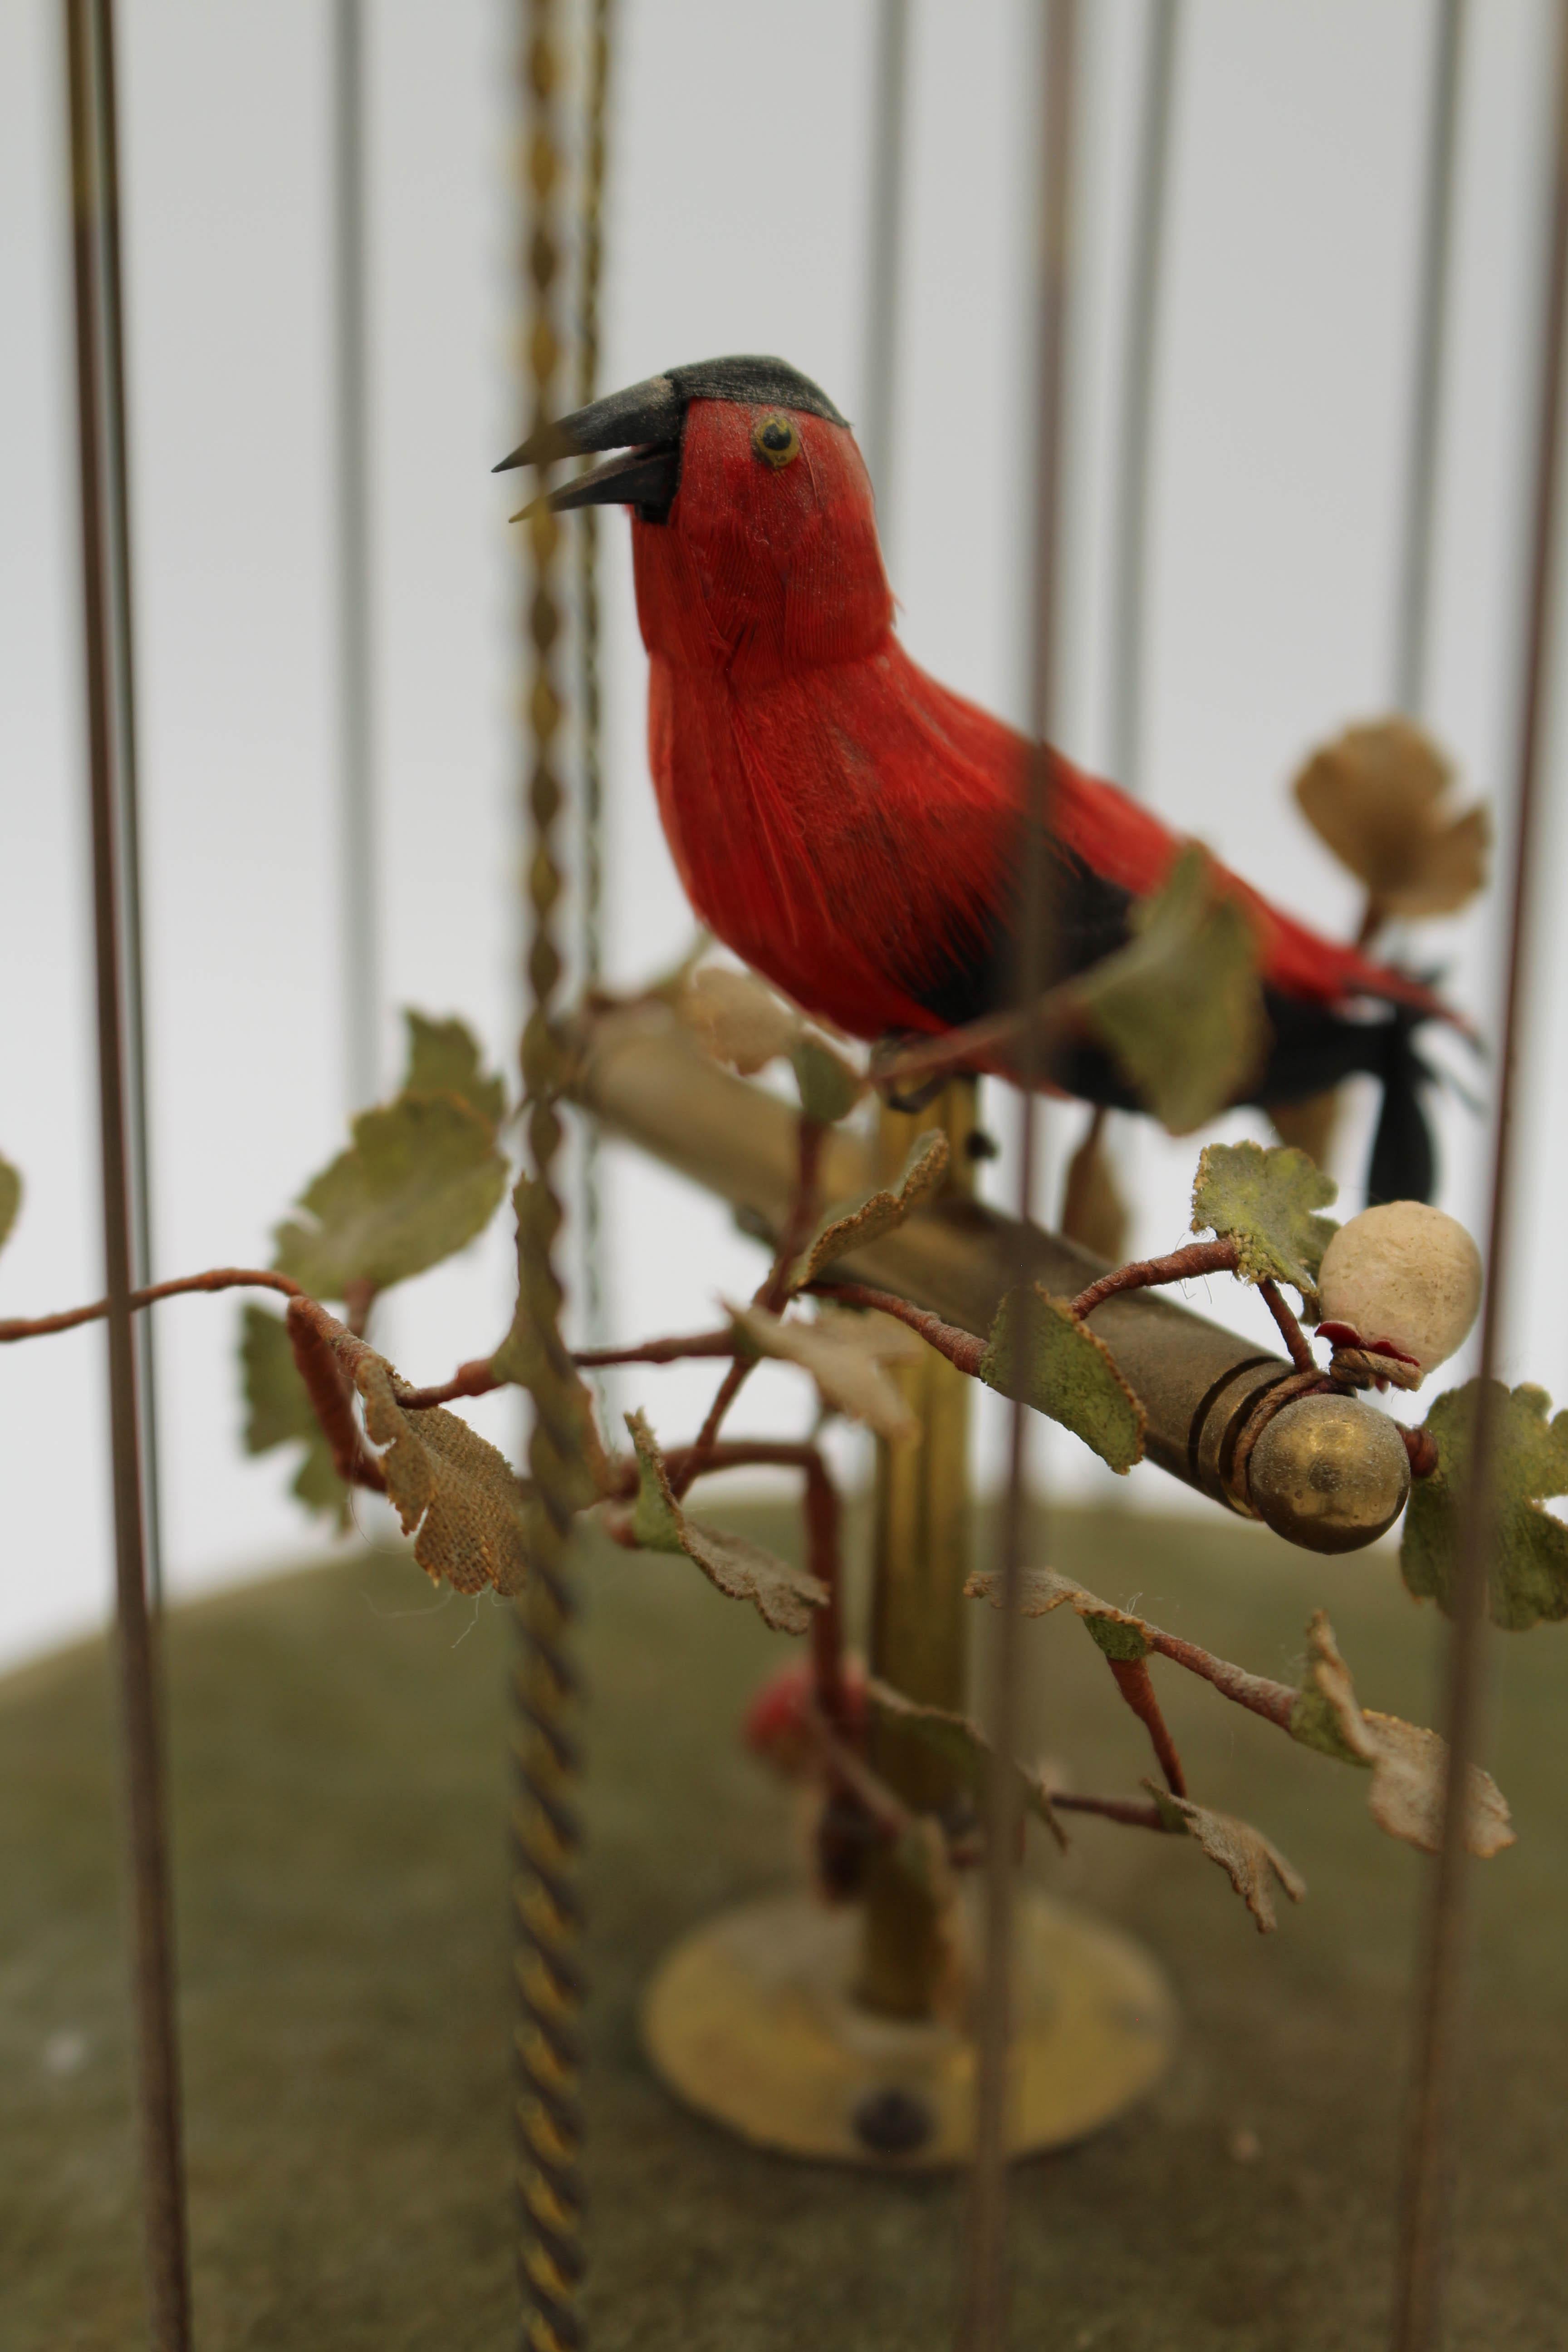 Mid-20th century Automaton signing bird in cage music box by Karl Griesbaum. Made in Germany, working condition. 12 1/4